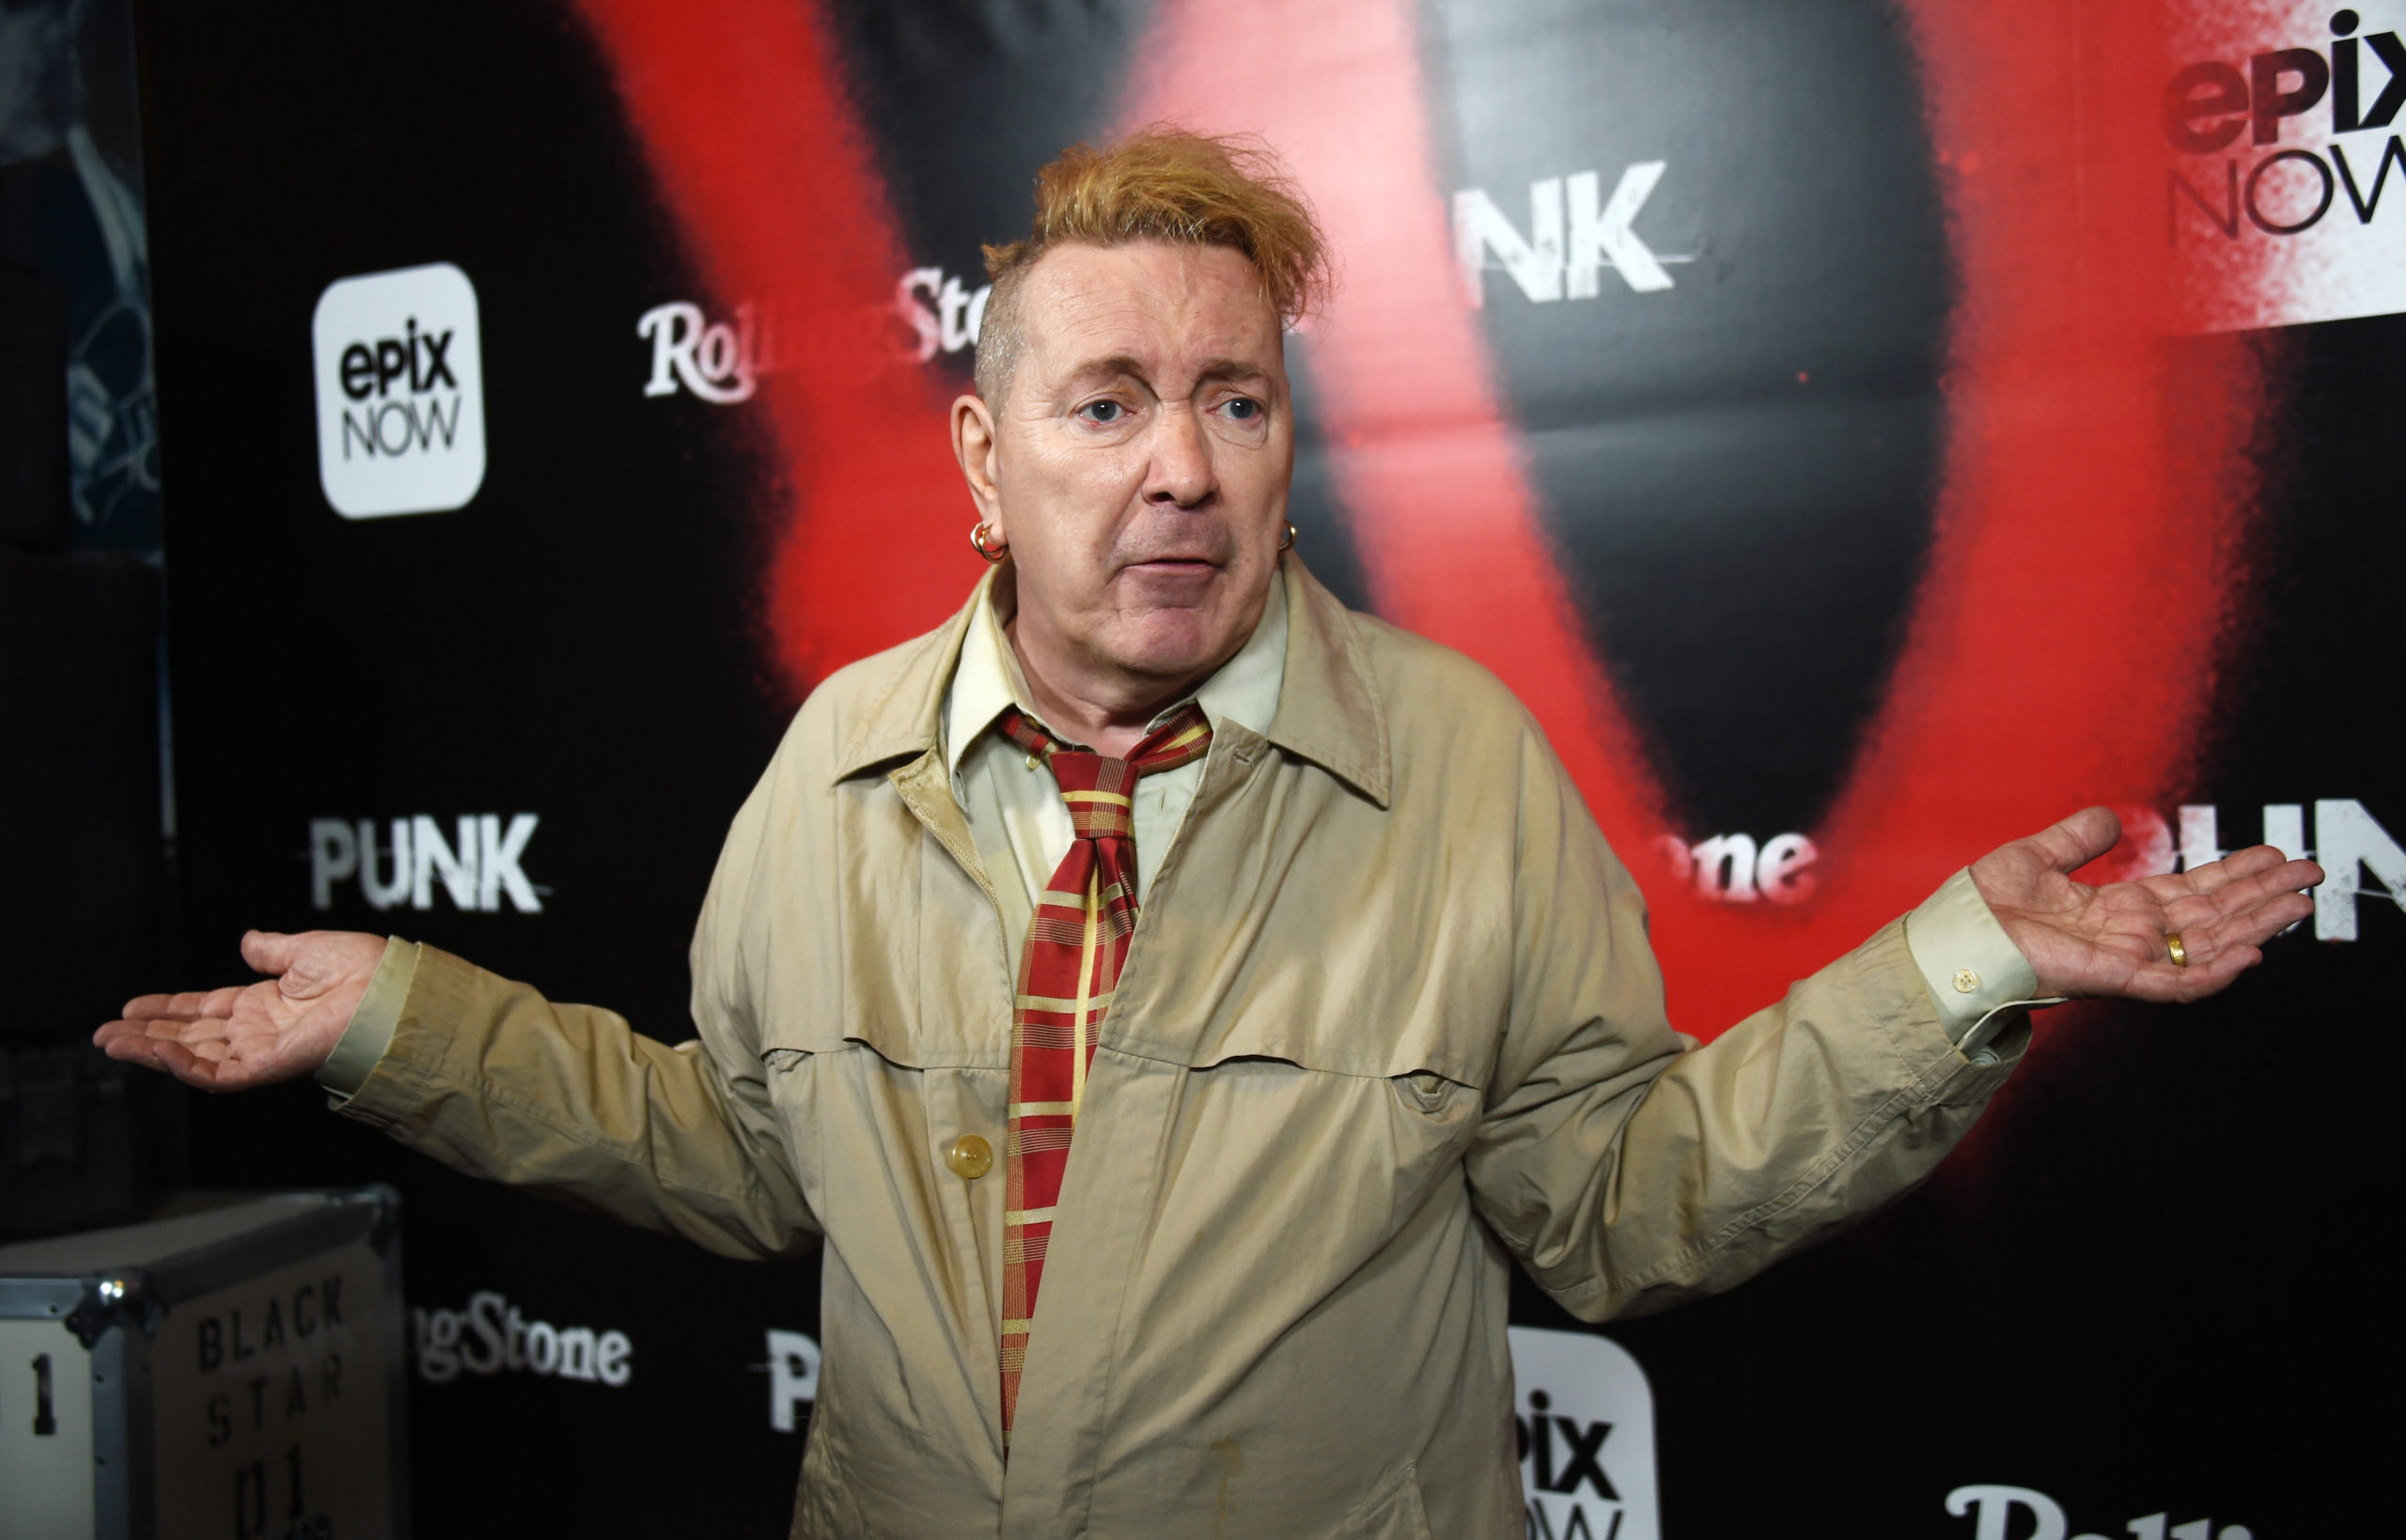 Sex Pistols star Johnny Rotten, who 'doesn't like the ide...